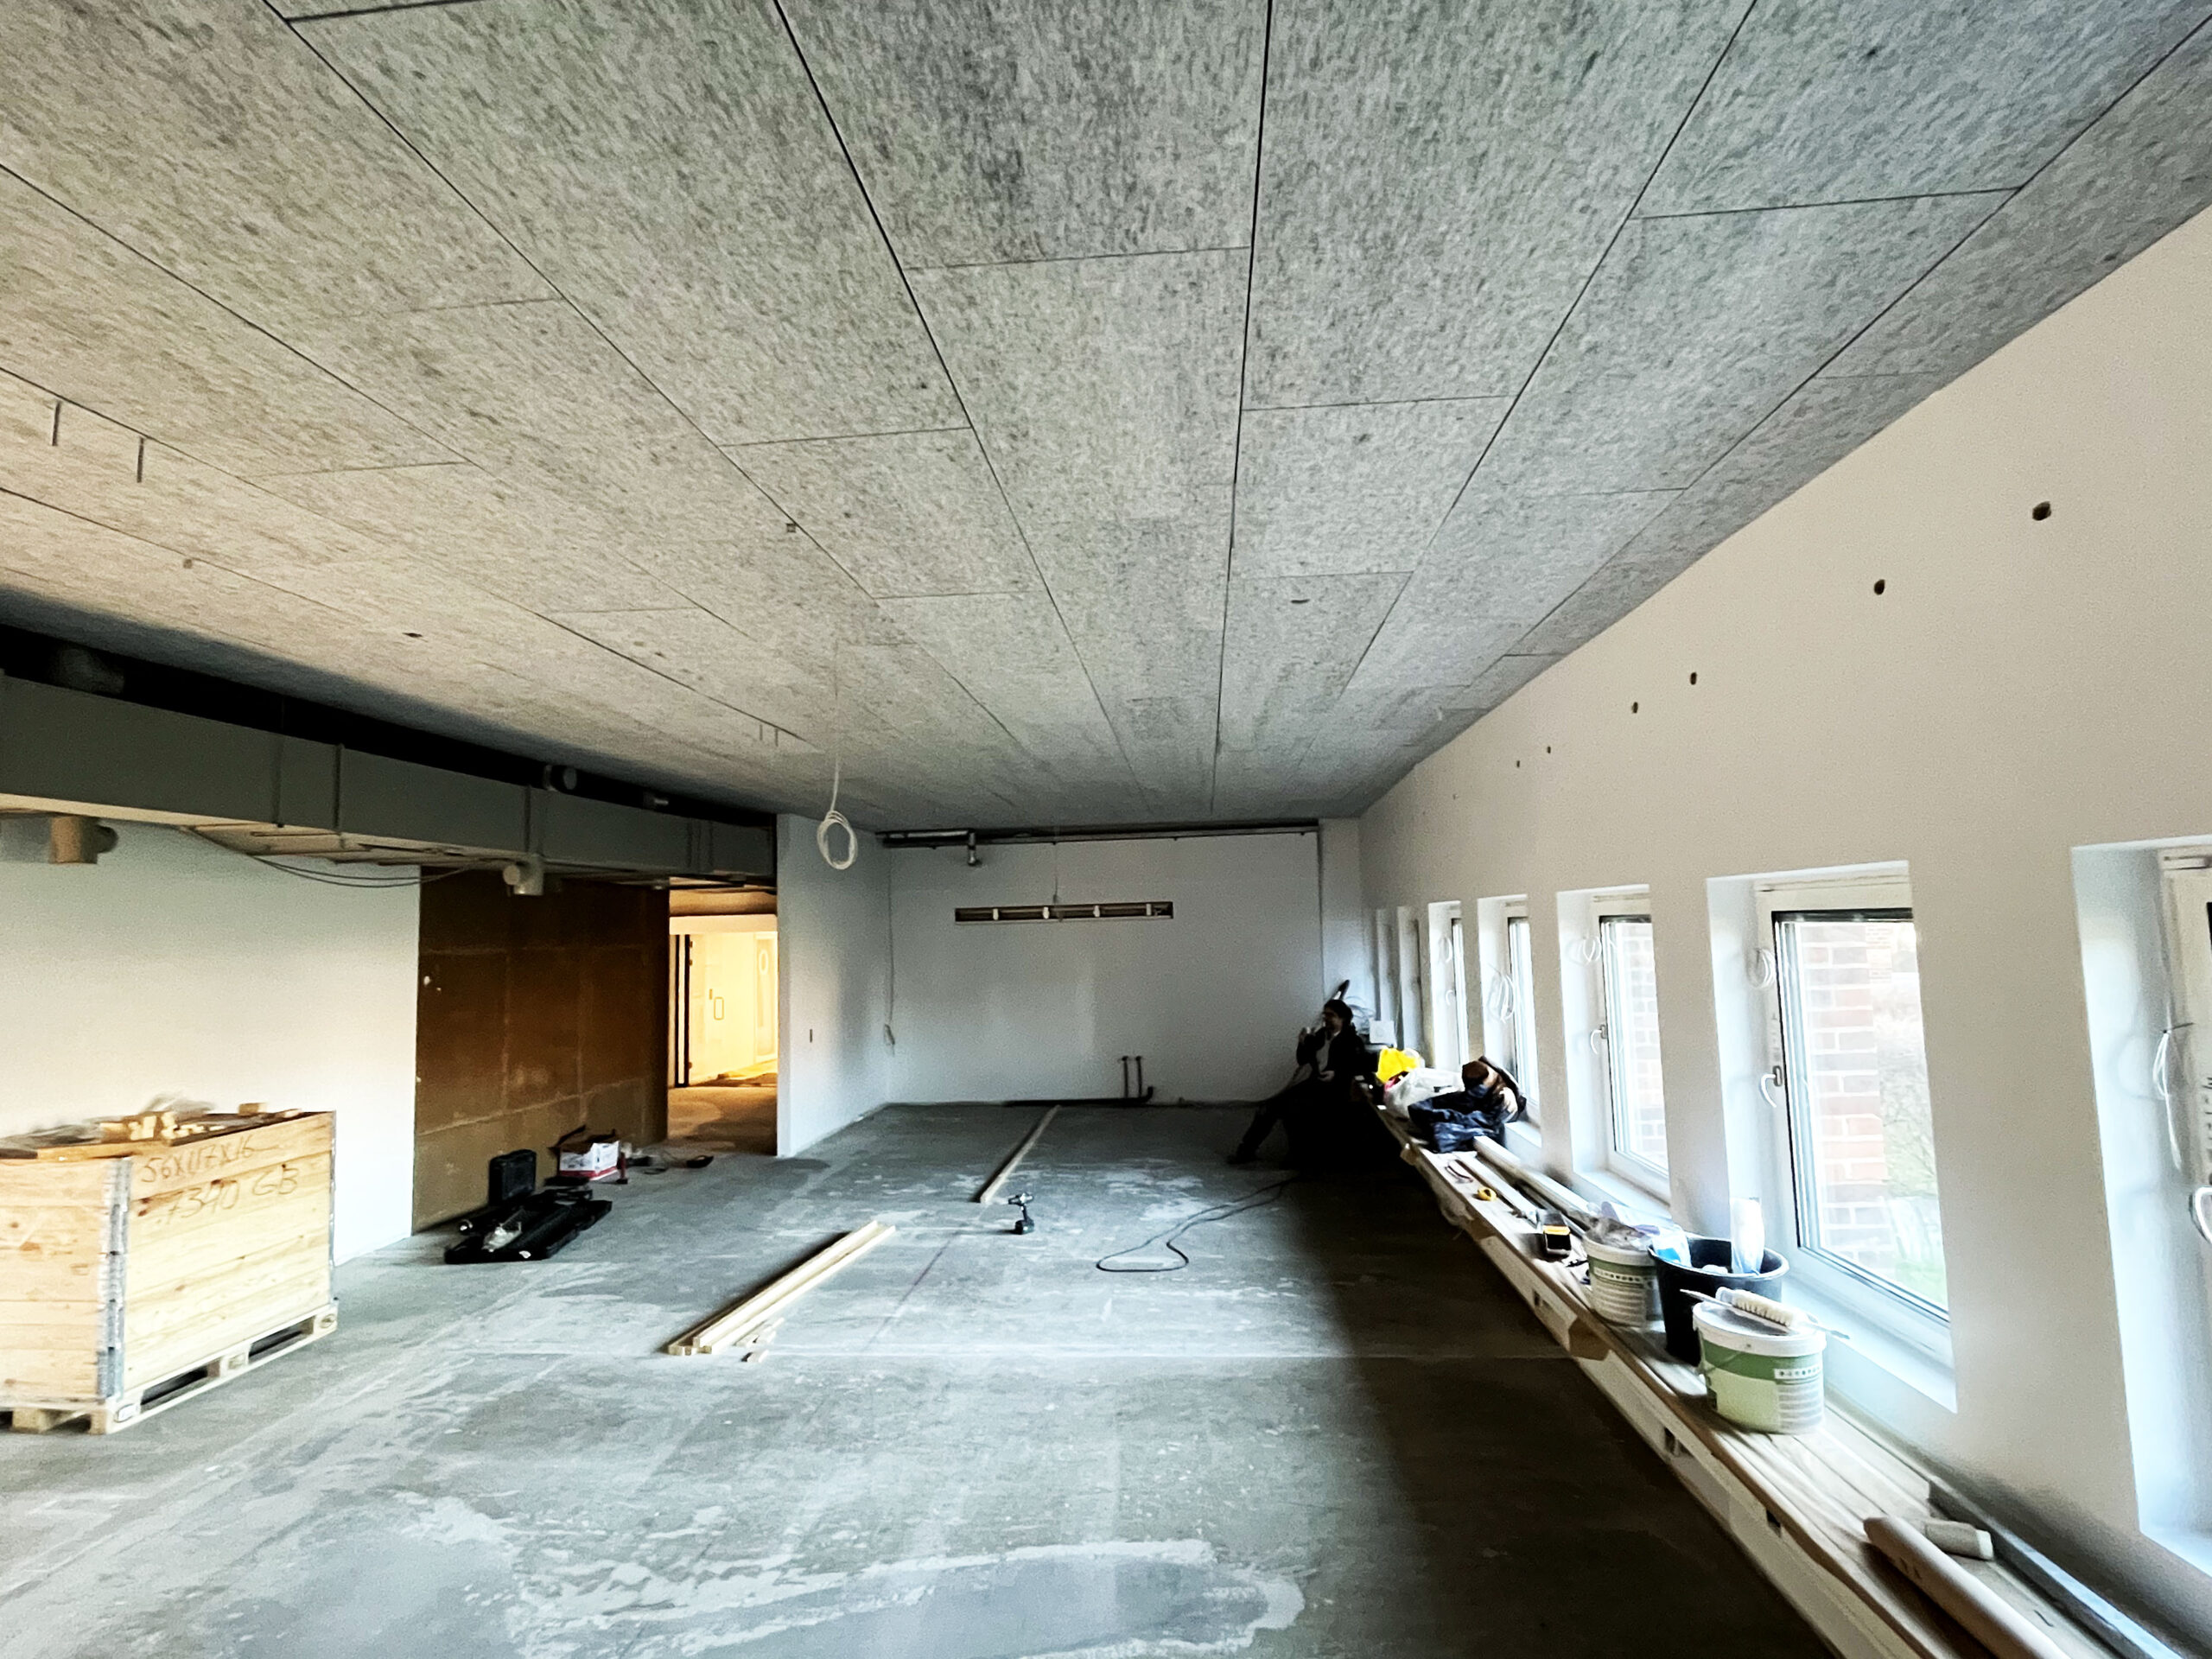 dybø acoustic batts are installed in Science City Lyngby to insulate and reduce noise .